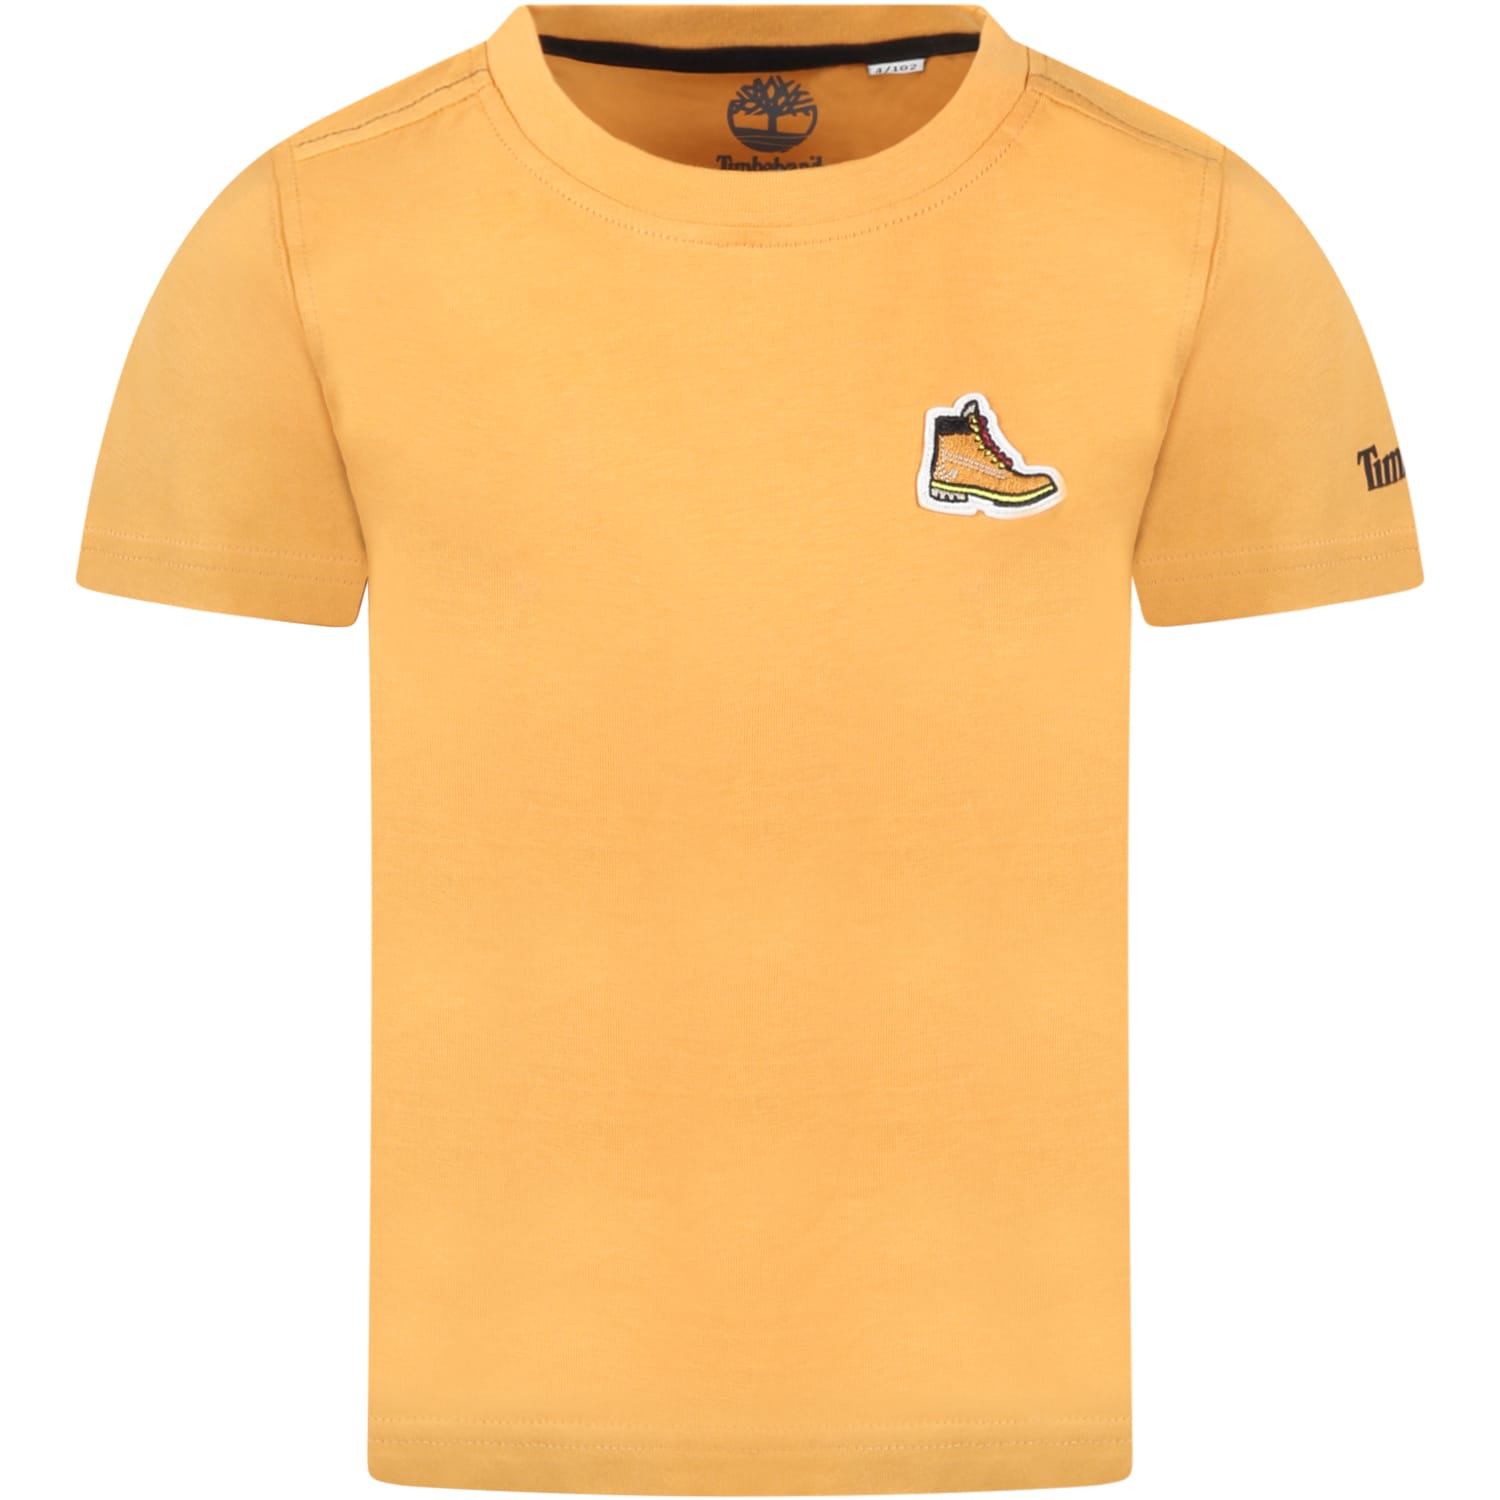 Timberland Yellow T-shirt For Boy With Iconic Shoe